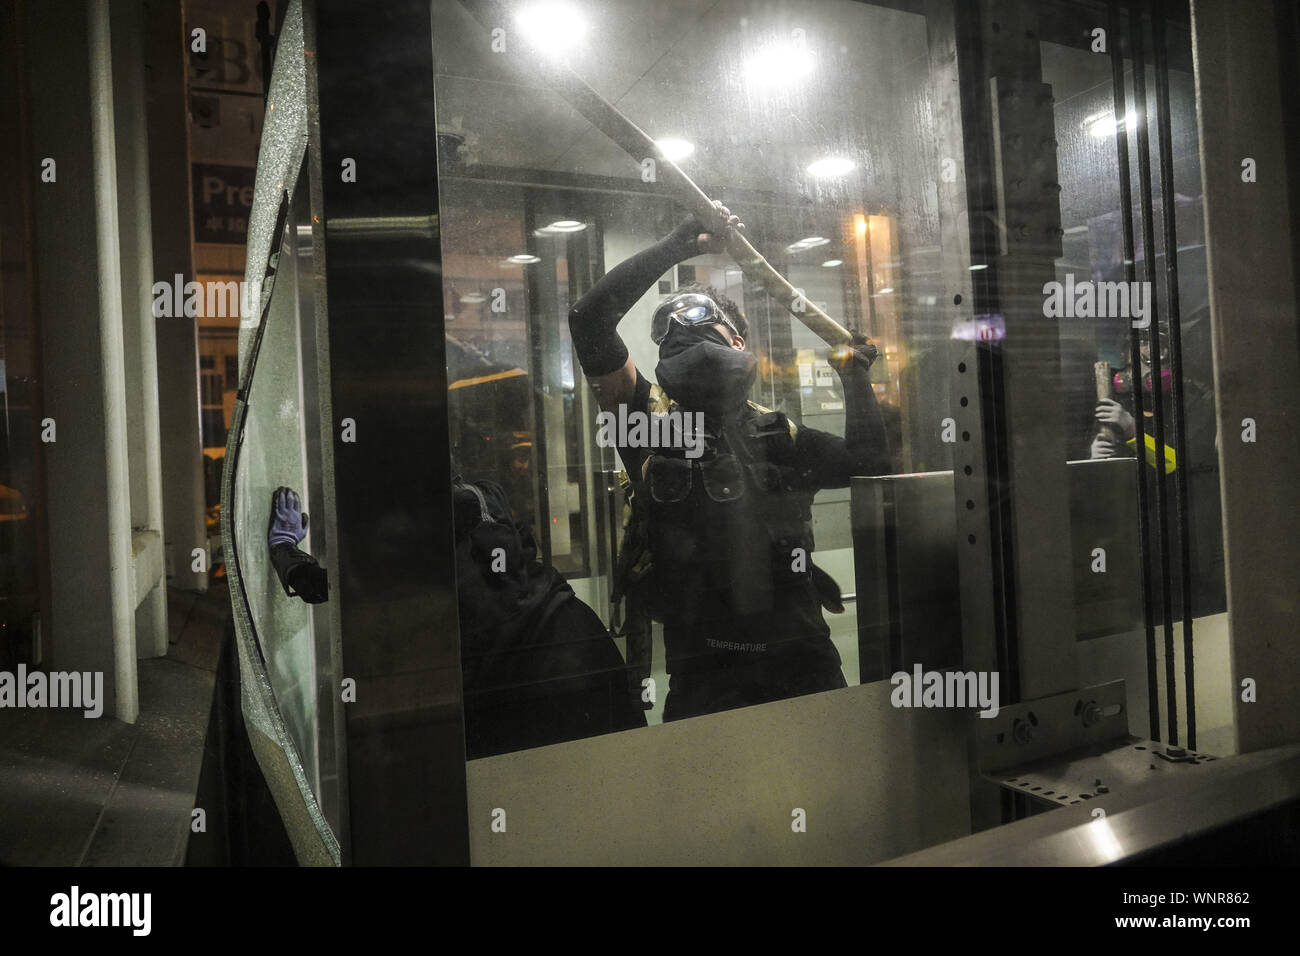 Kowloon, Hong Kong. 6th Sep, 2019. Protesters smash glass on an elevator at Yau Ma Tei Metro Station on Friday September 6, 2019 in Mong Kok Town Kowloon, Hong Kong.Thousands of protestors gathered outside of Mong Kok police station and around that area to protest the police violence against citizens of Hong Kong.Protesters Moved Nathan Rd to south, destroying surveillance cameras, street signs, building barricades with wooden panes and garbages then set on fire as they move on.9/6/2019.Kowloon, Hong Kong. Credit: ZUMA Press, Inc./Alamy Live News Stock Photo